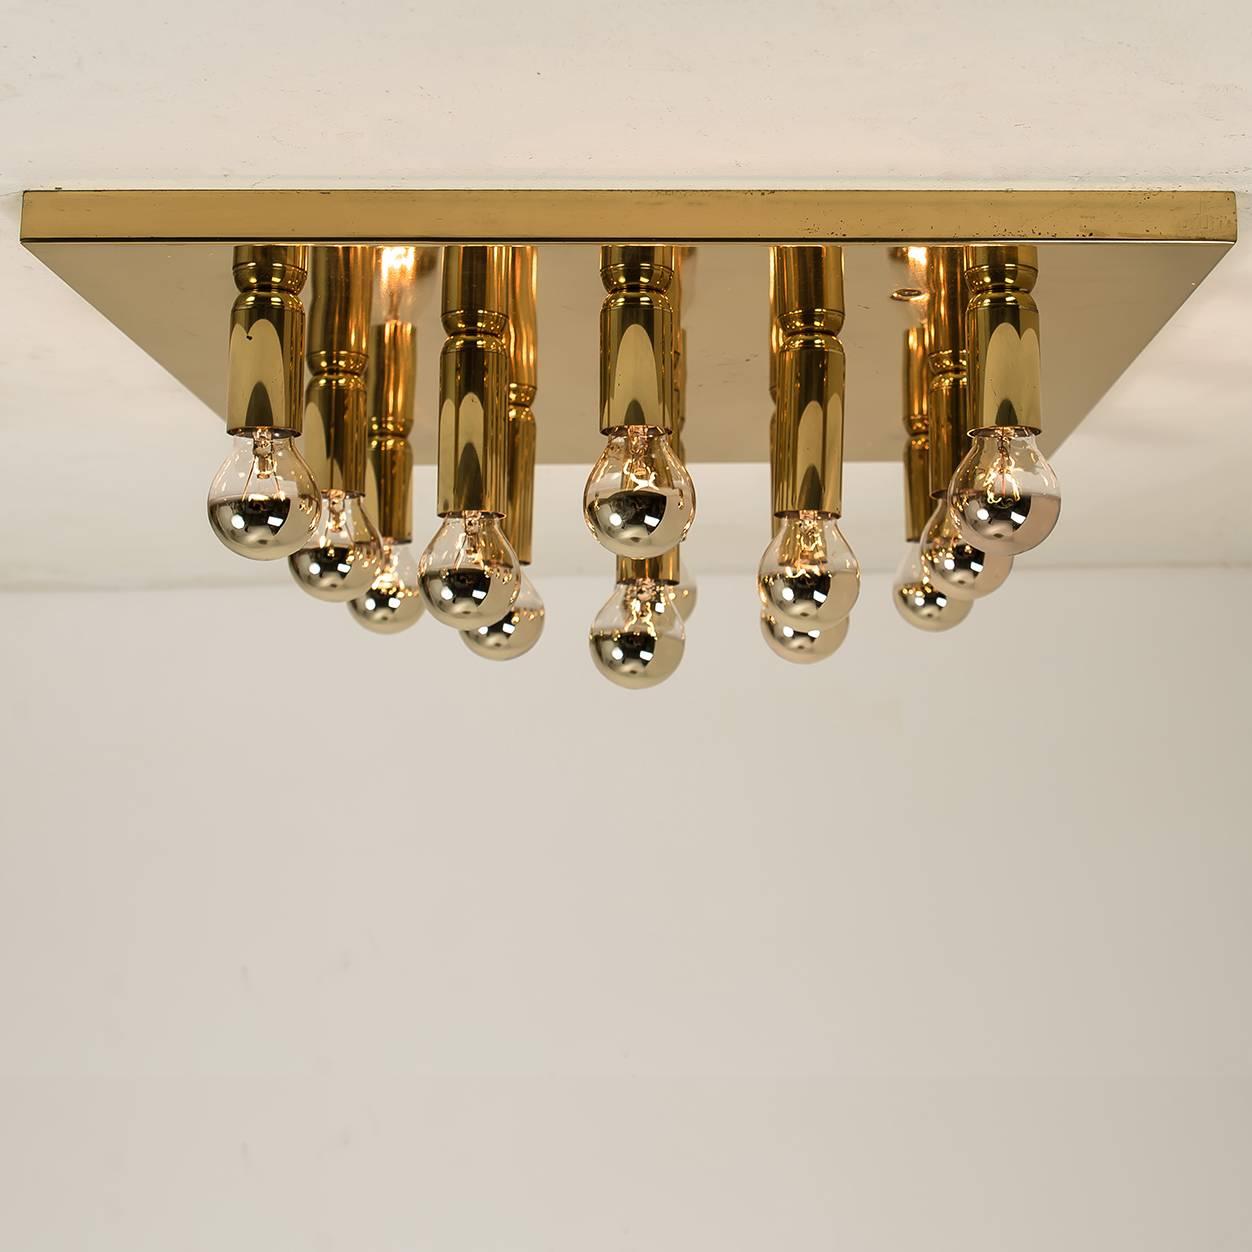 A Sciolari style geometric sculptural flush mount chandelier. Simple and beautiful.
Can also work for impressive wall light. The timeless modern elegance of this flush mount is sure to lend a special atmosphere in every home.

Presently fitted